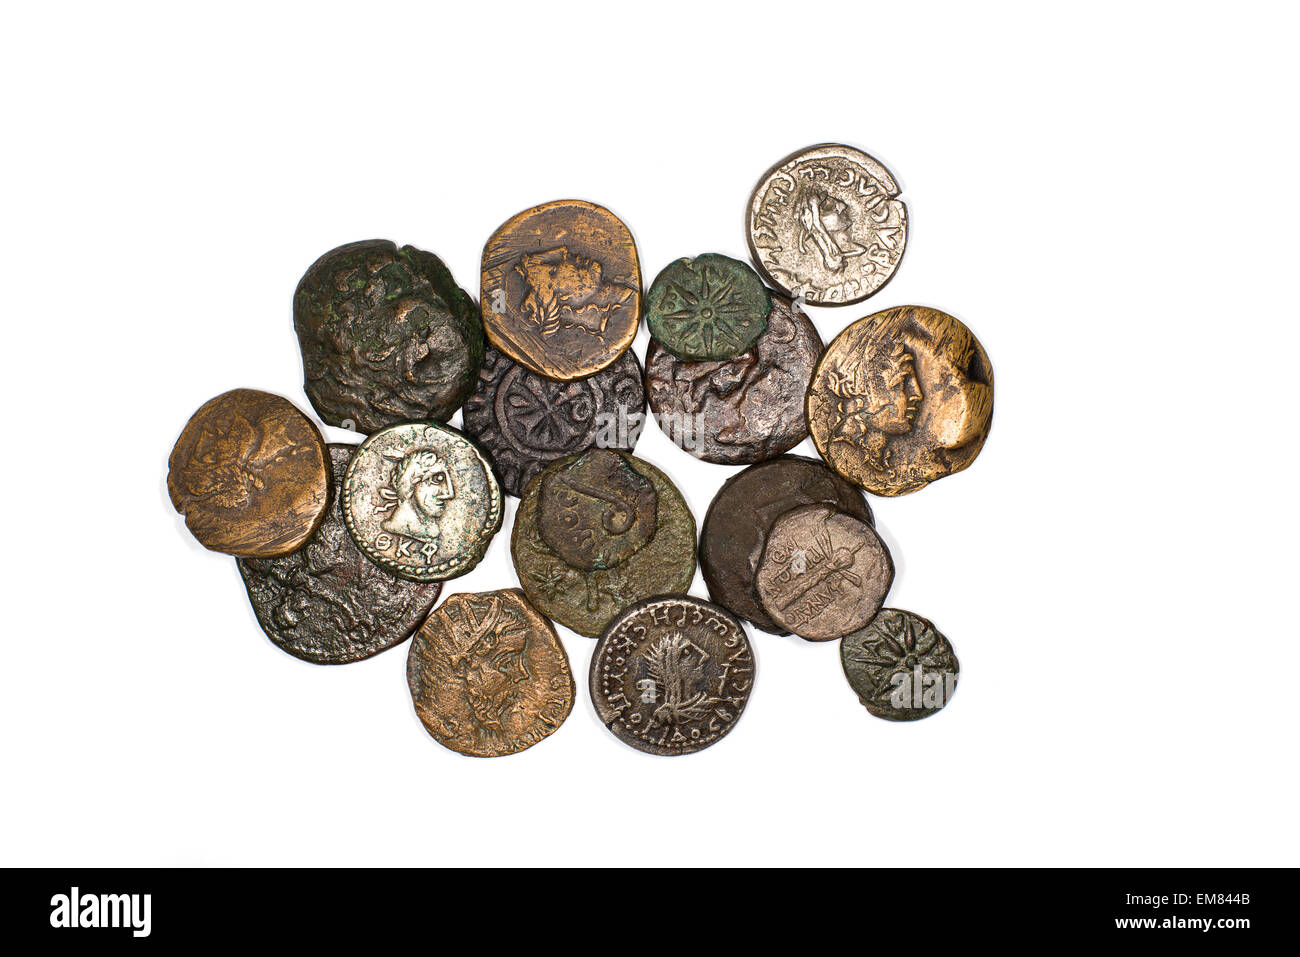 Many ancient bronze and silver coins on a white background Stock Photo